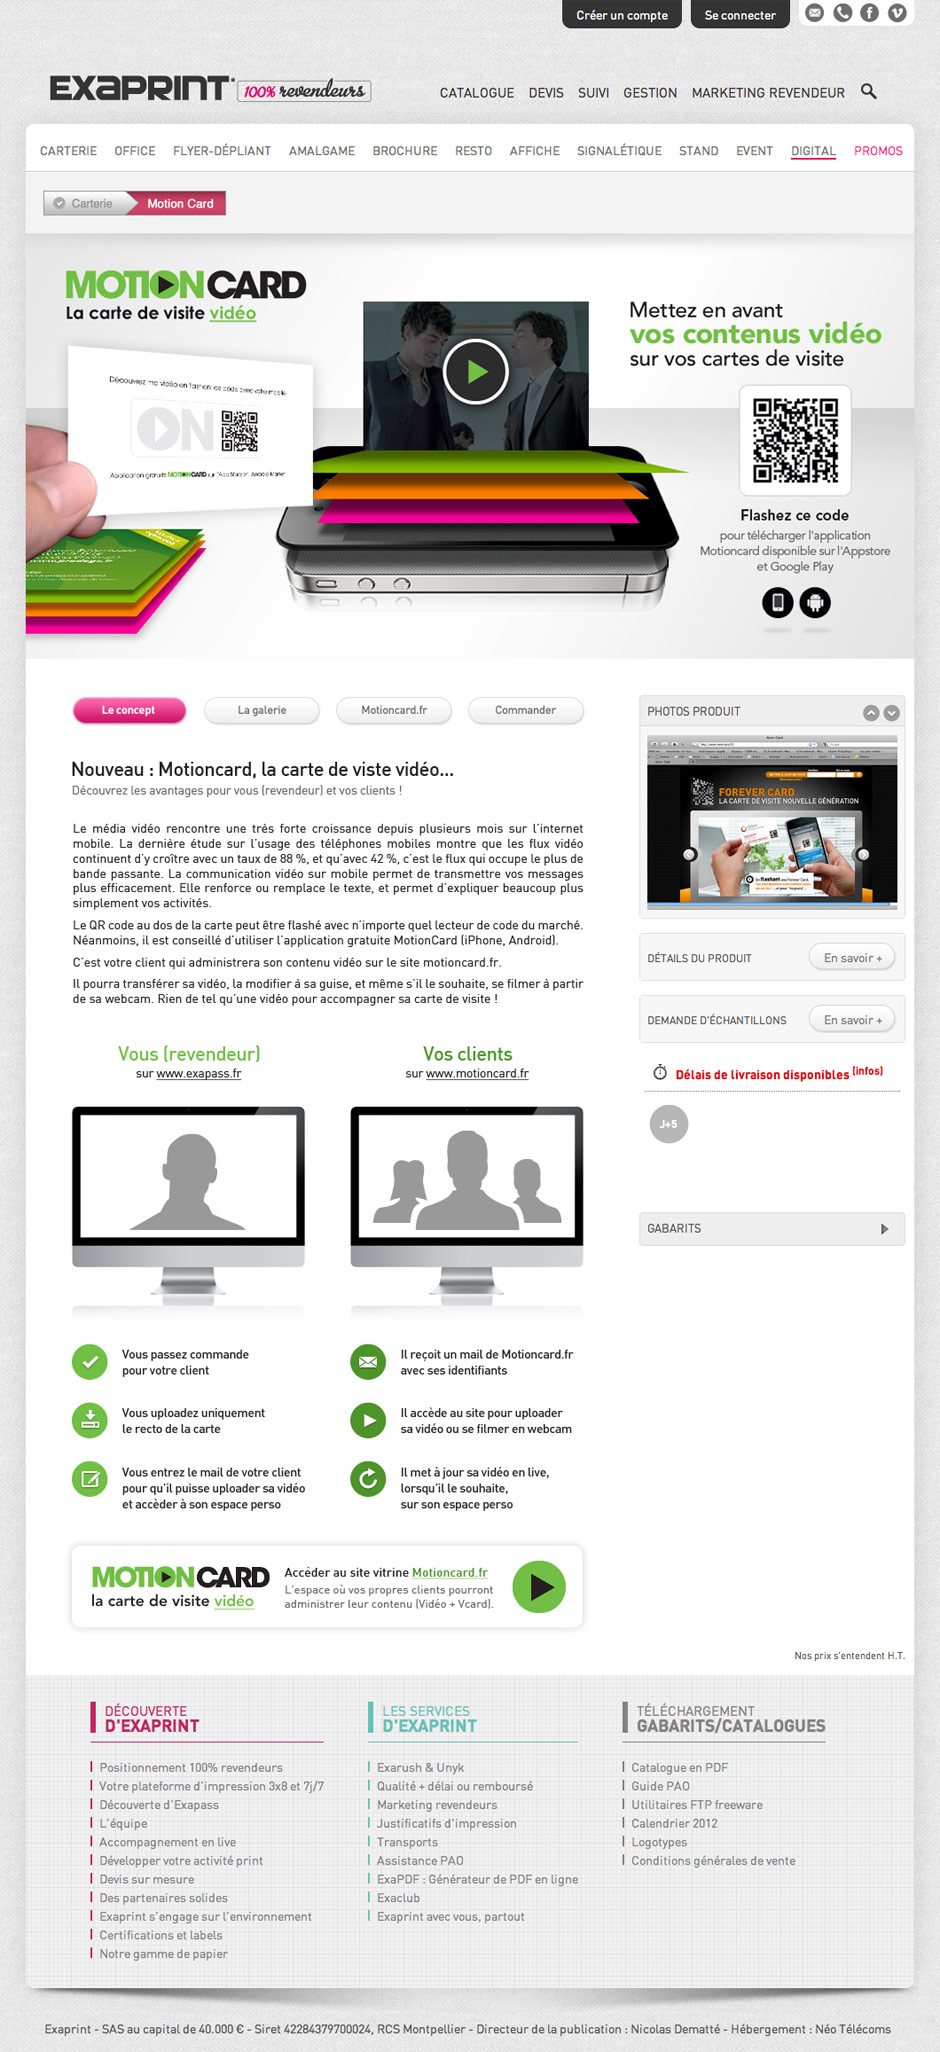 graphiste-montpellier-creation-exaprint-motioncard-agence-communication-montpellier-caconcept-alexis-cretin-3